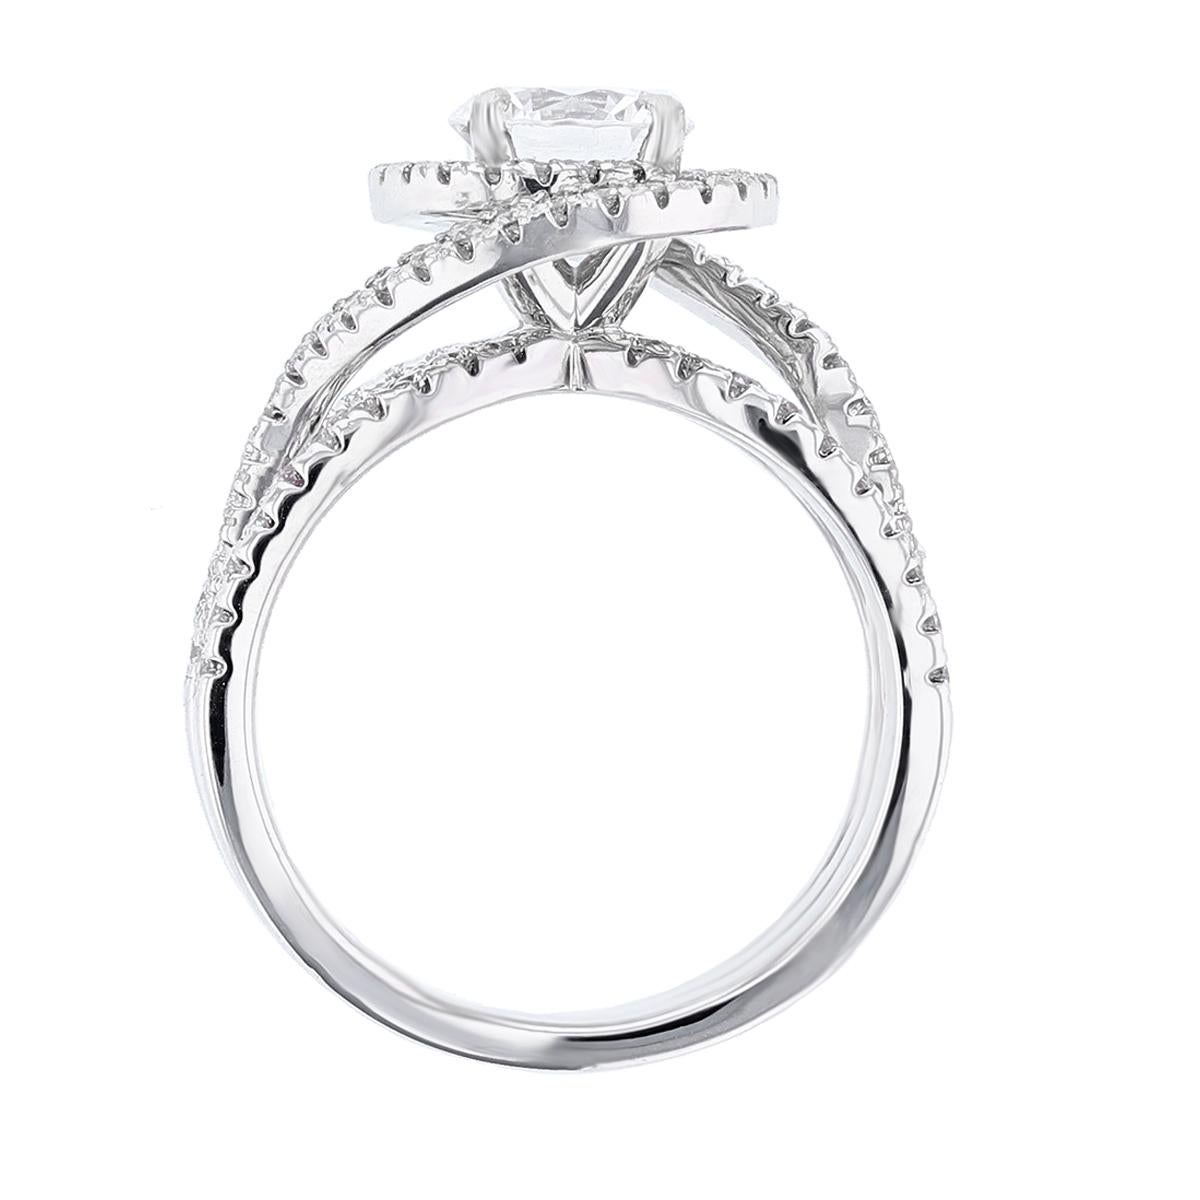 This ring is made in 14k white gold and features a 1.01ct round cut diamond GIA certified color grade (G) clarity grade (SI1). The certificate number is 